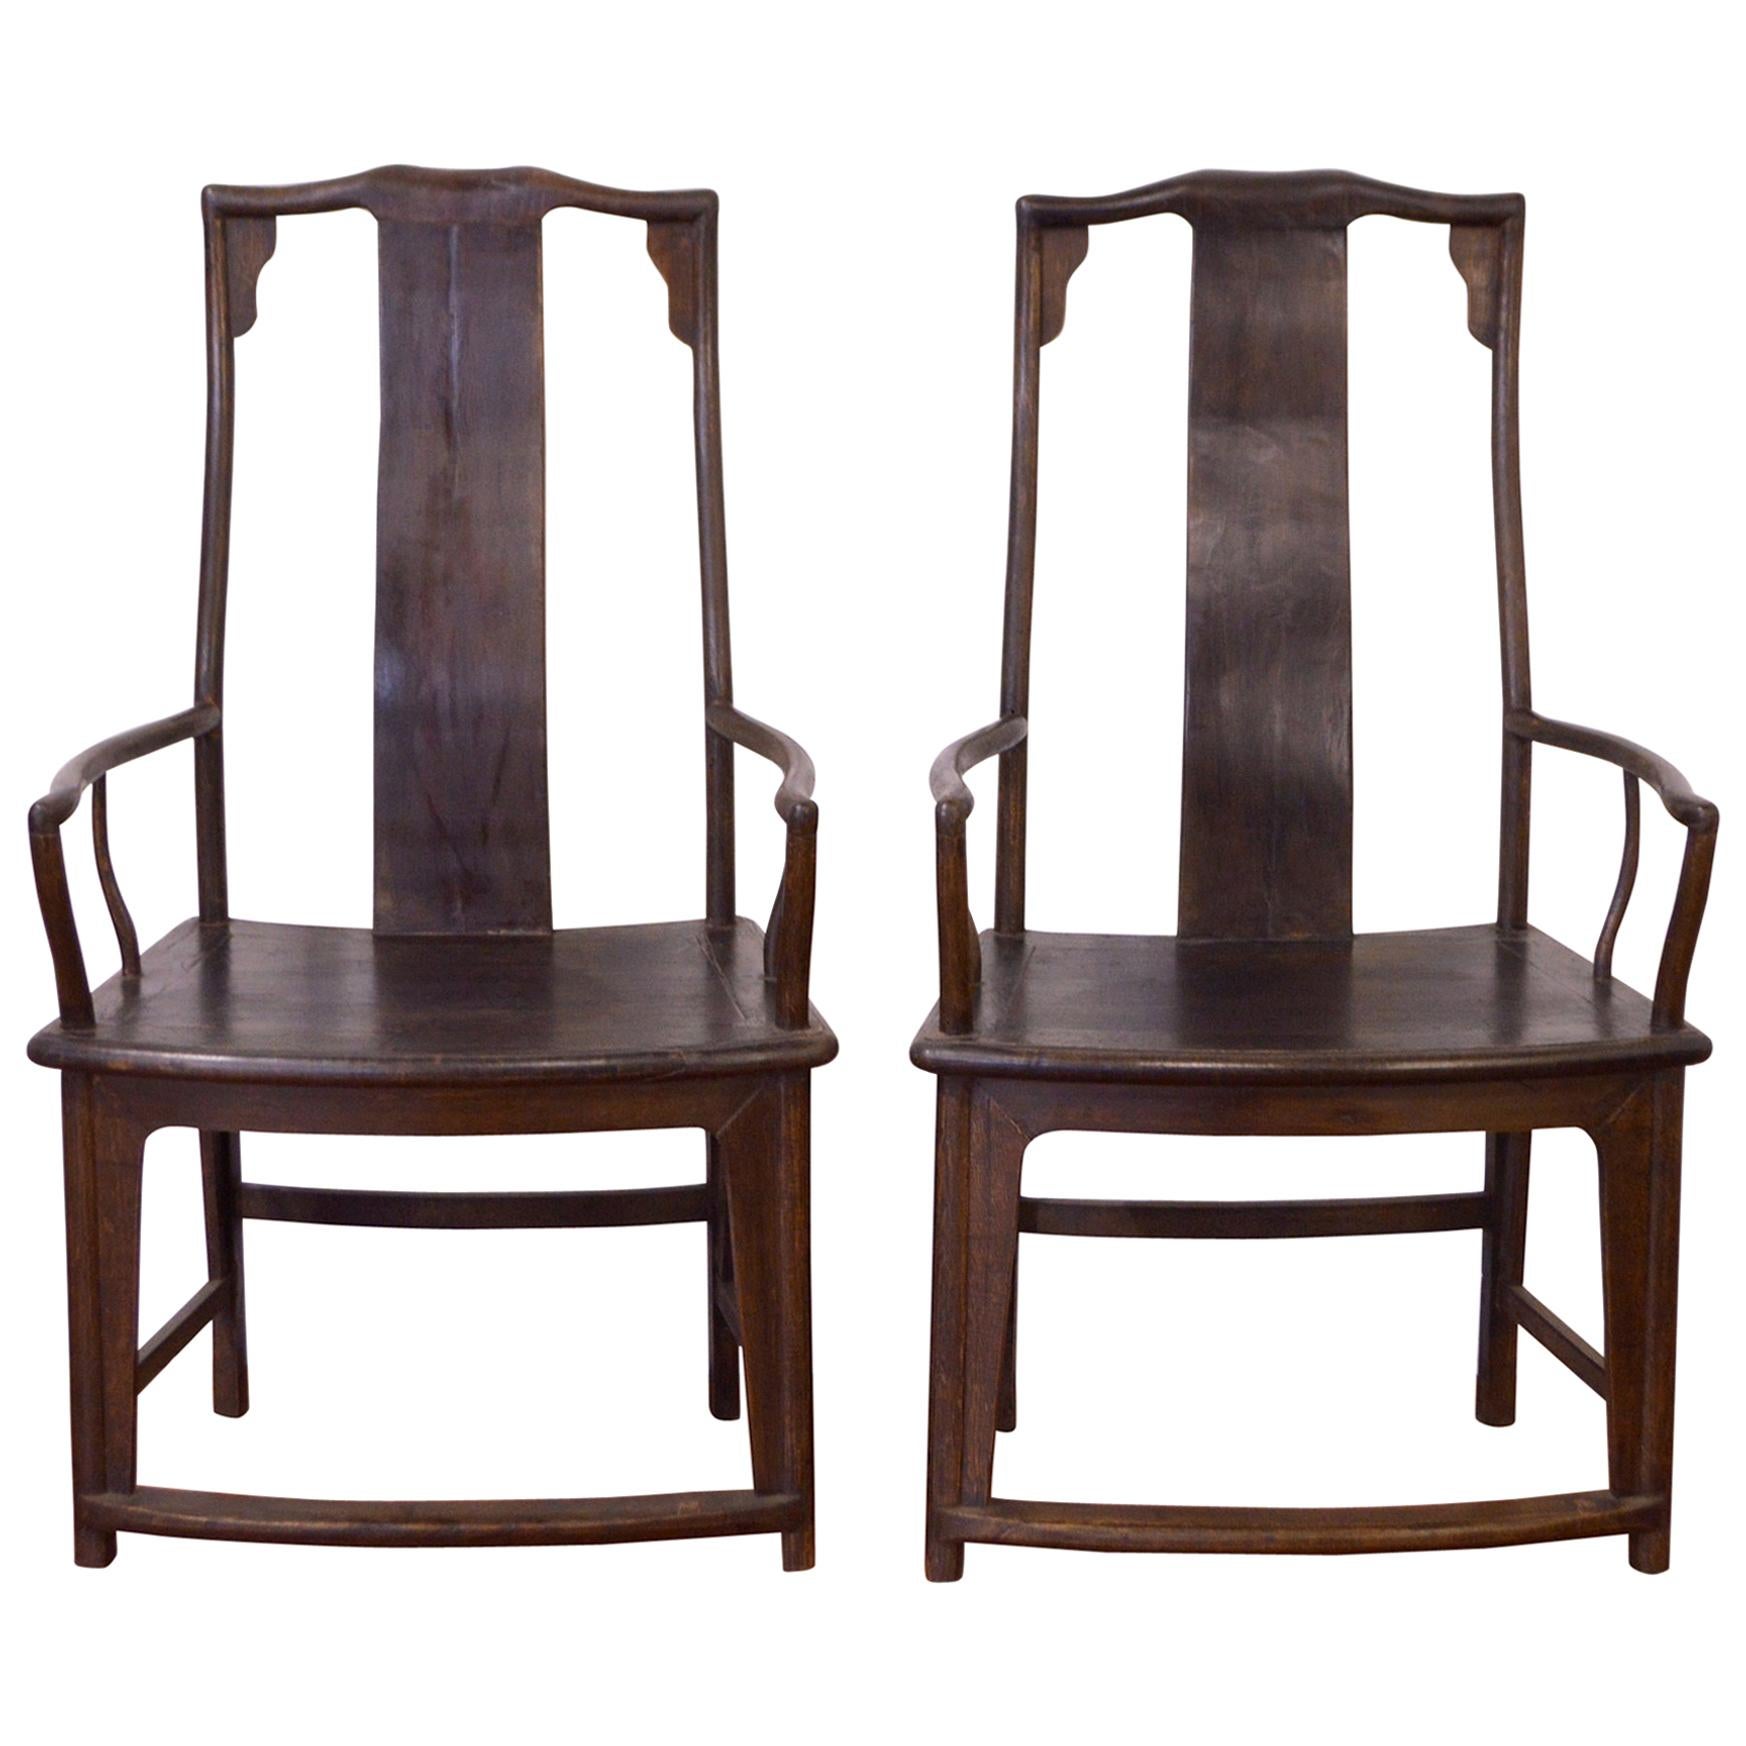 Late 19th Century Pair of Chinese Chairs For Sale